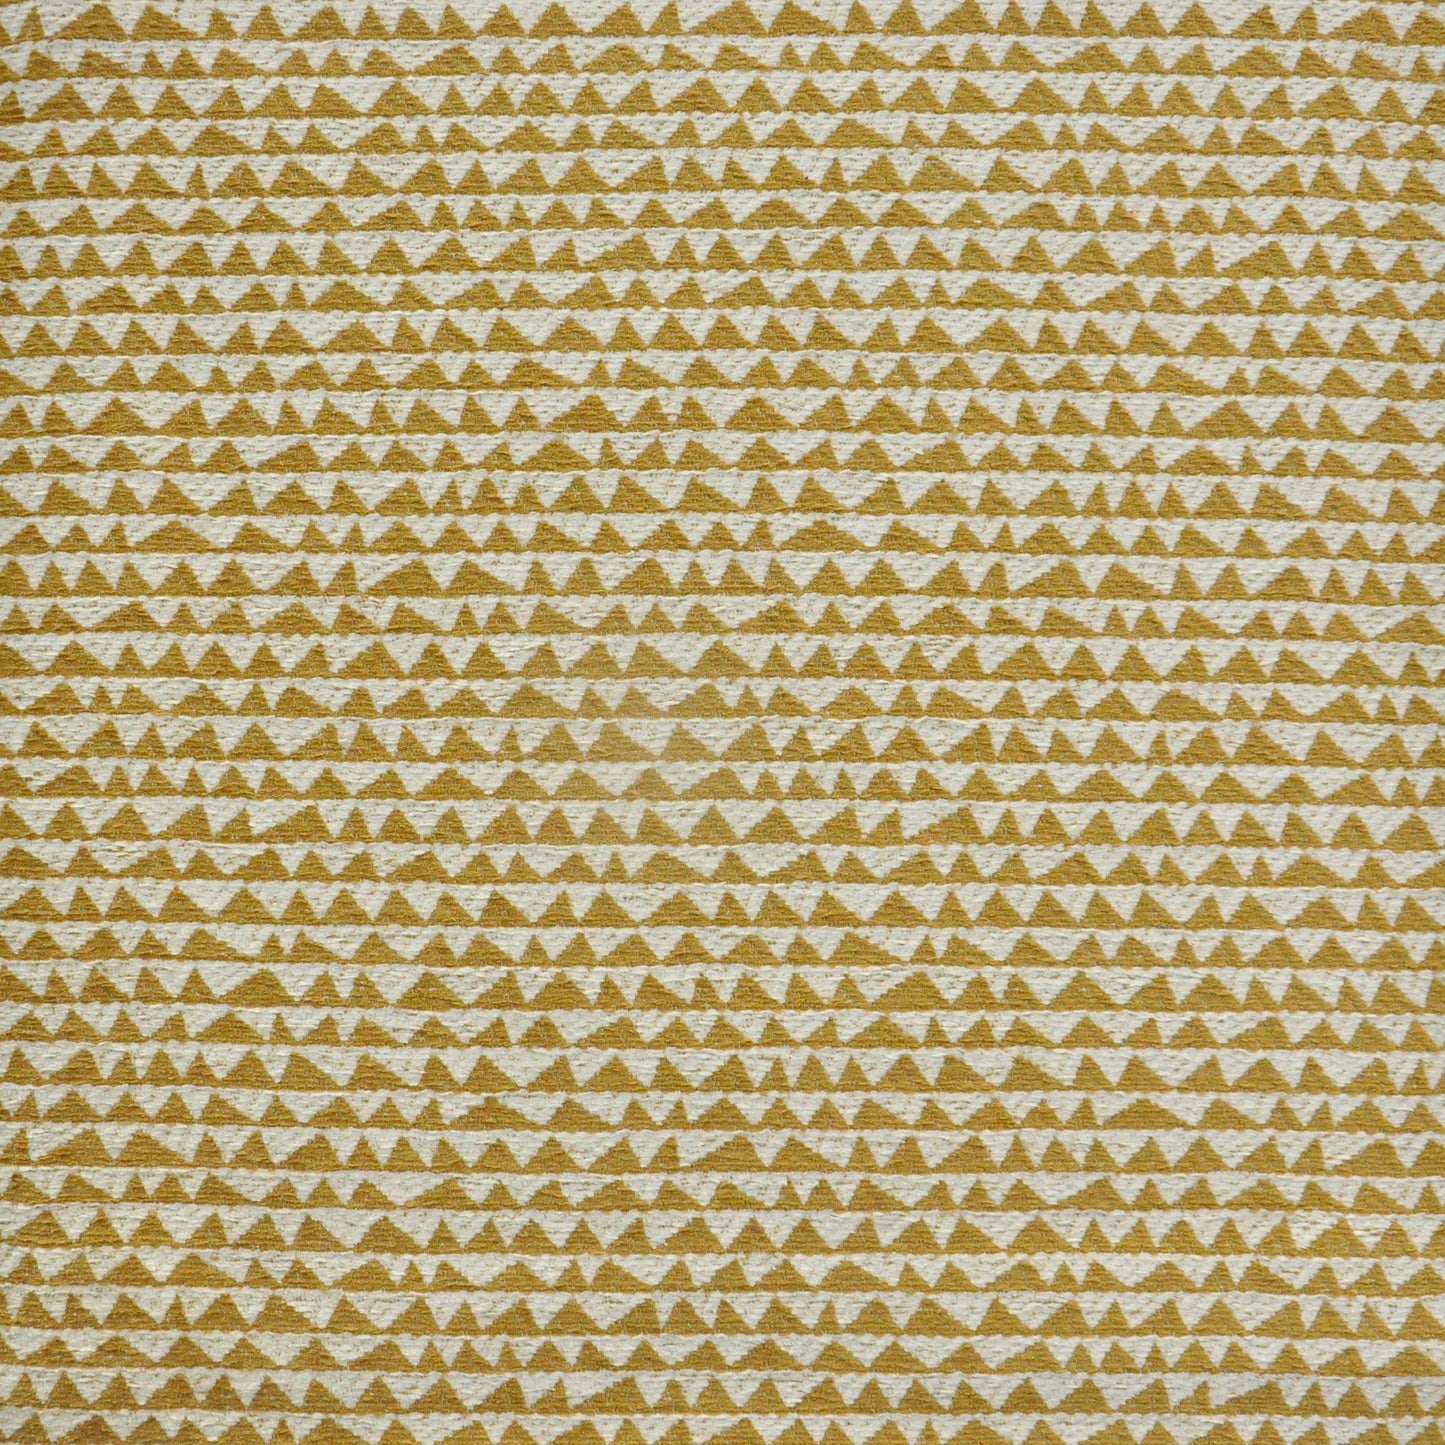 Purchase Maxwell Fabric - Mountaineer, # 807 Camel